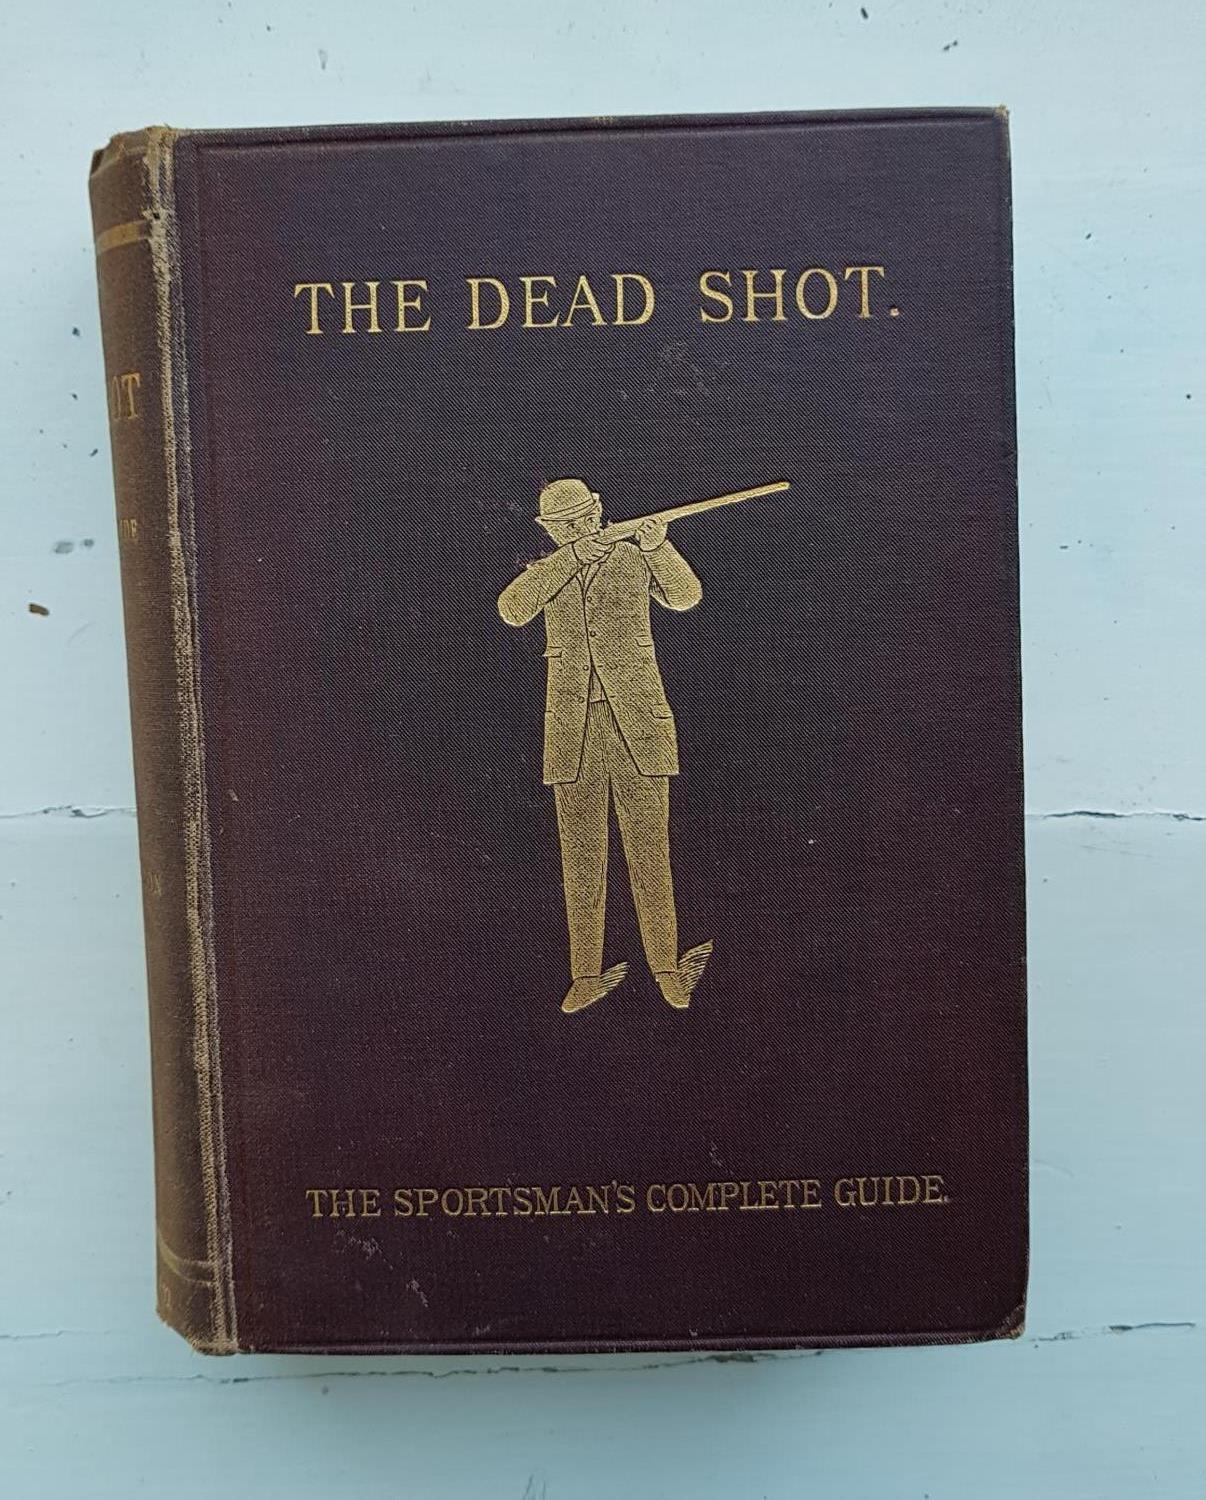 'The Dead Shot or Sportsman Guide' along with other volumes. - Image 3 of 5